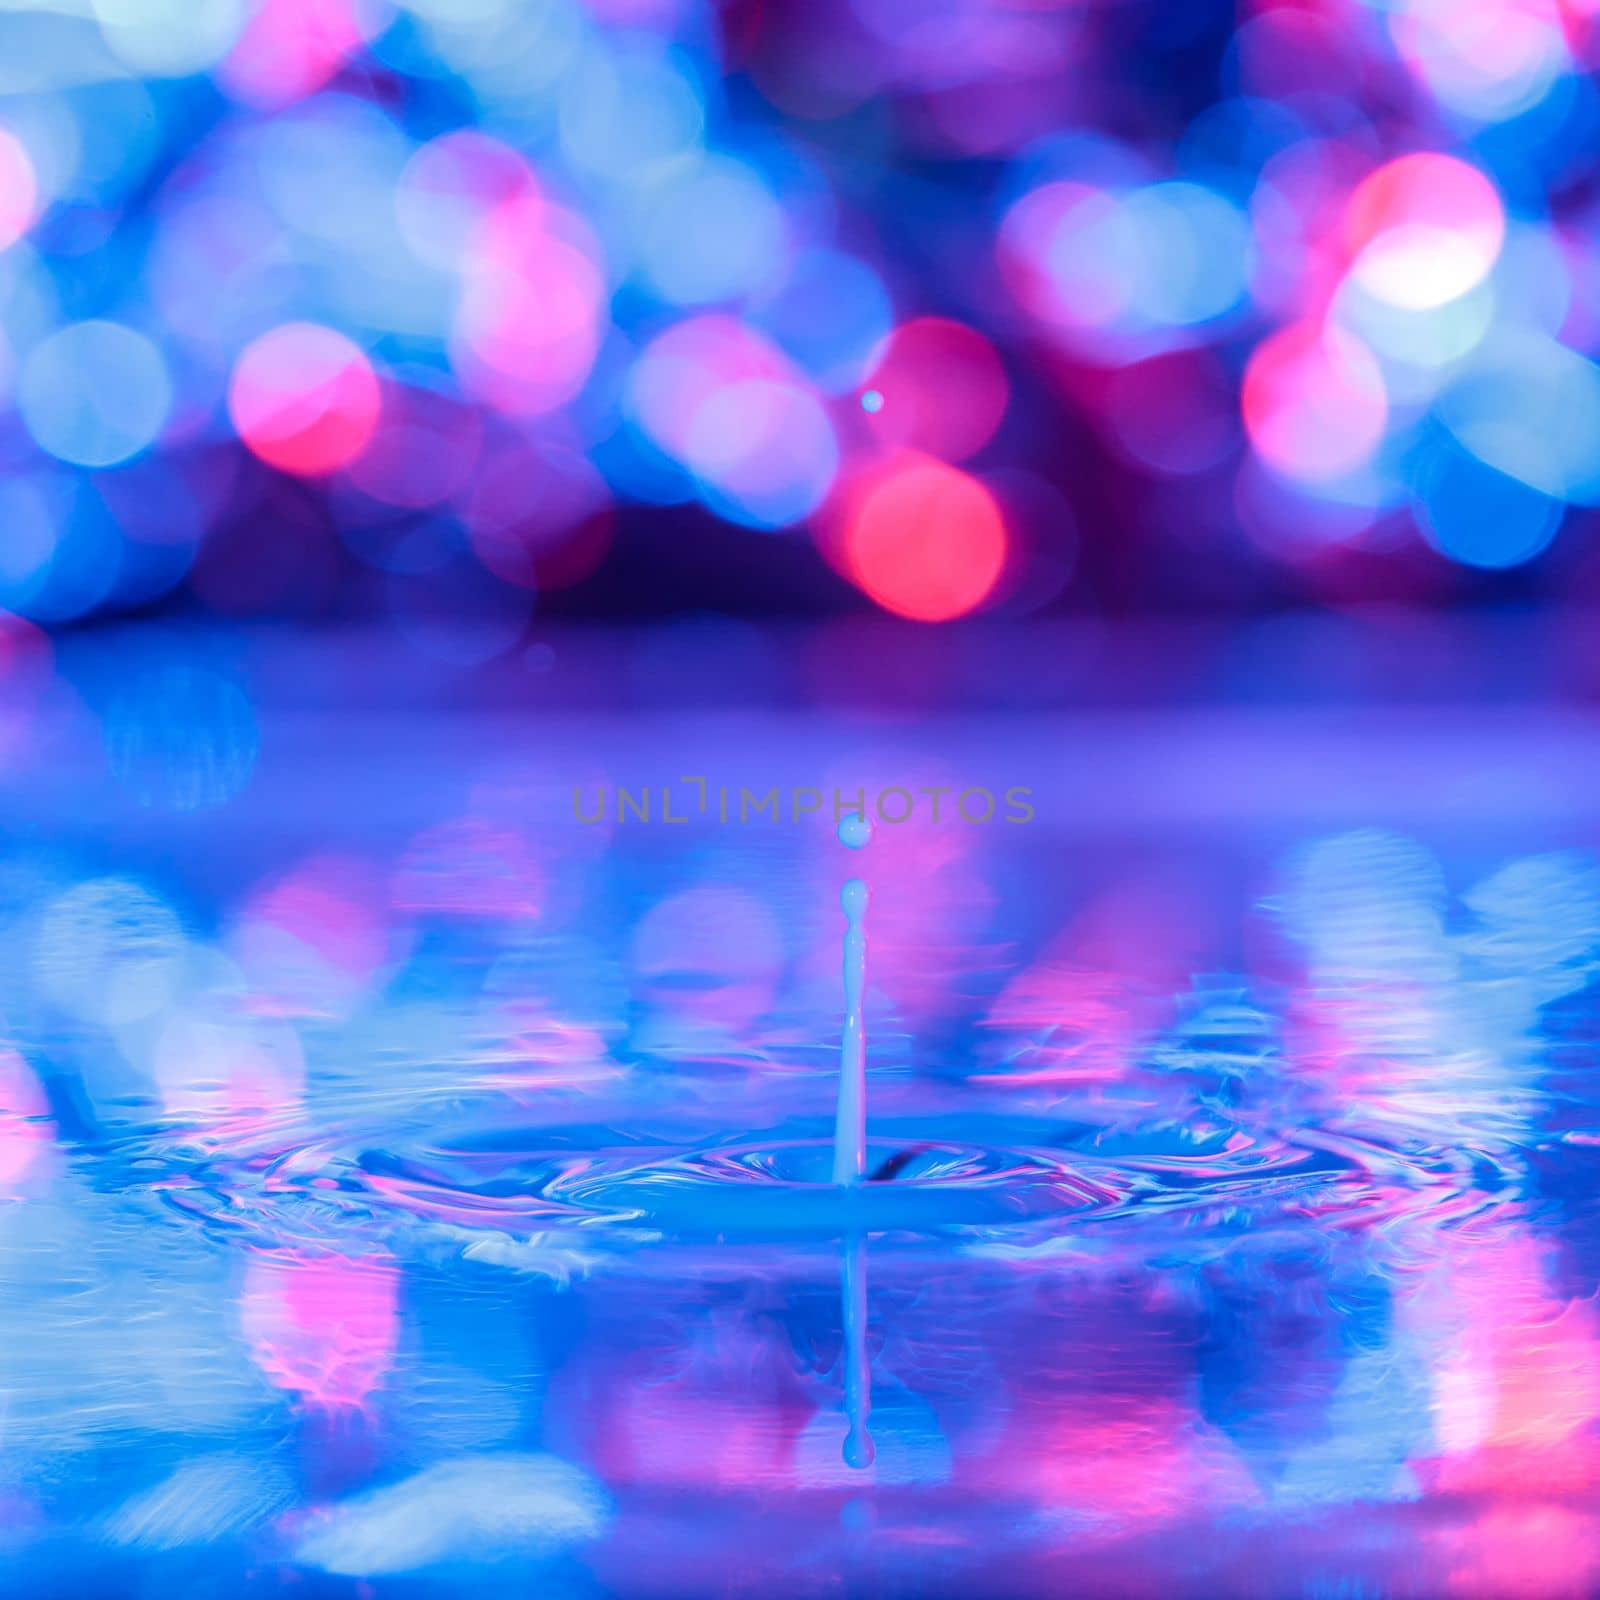 A drop falls into a thick liquid with a blue-violet background. Abstract colorful background. by Yurich32